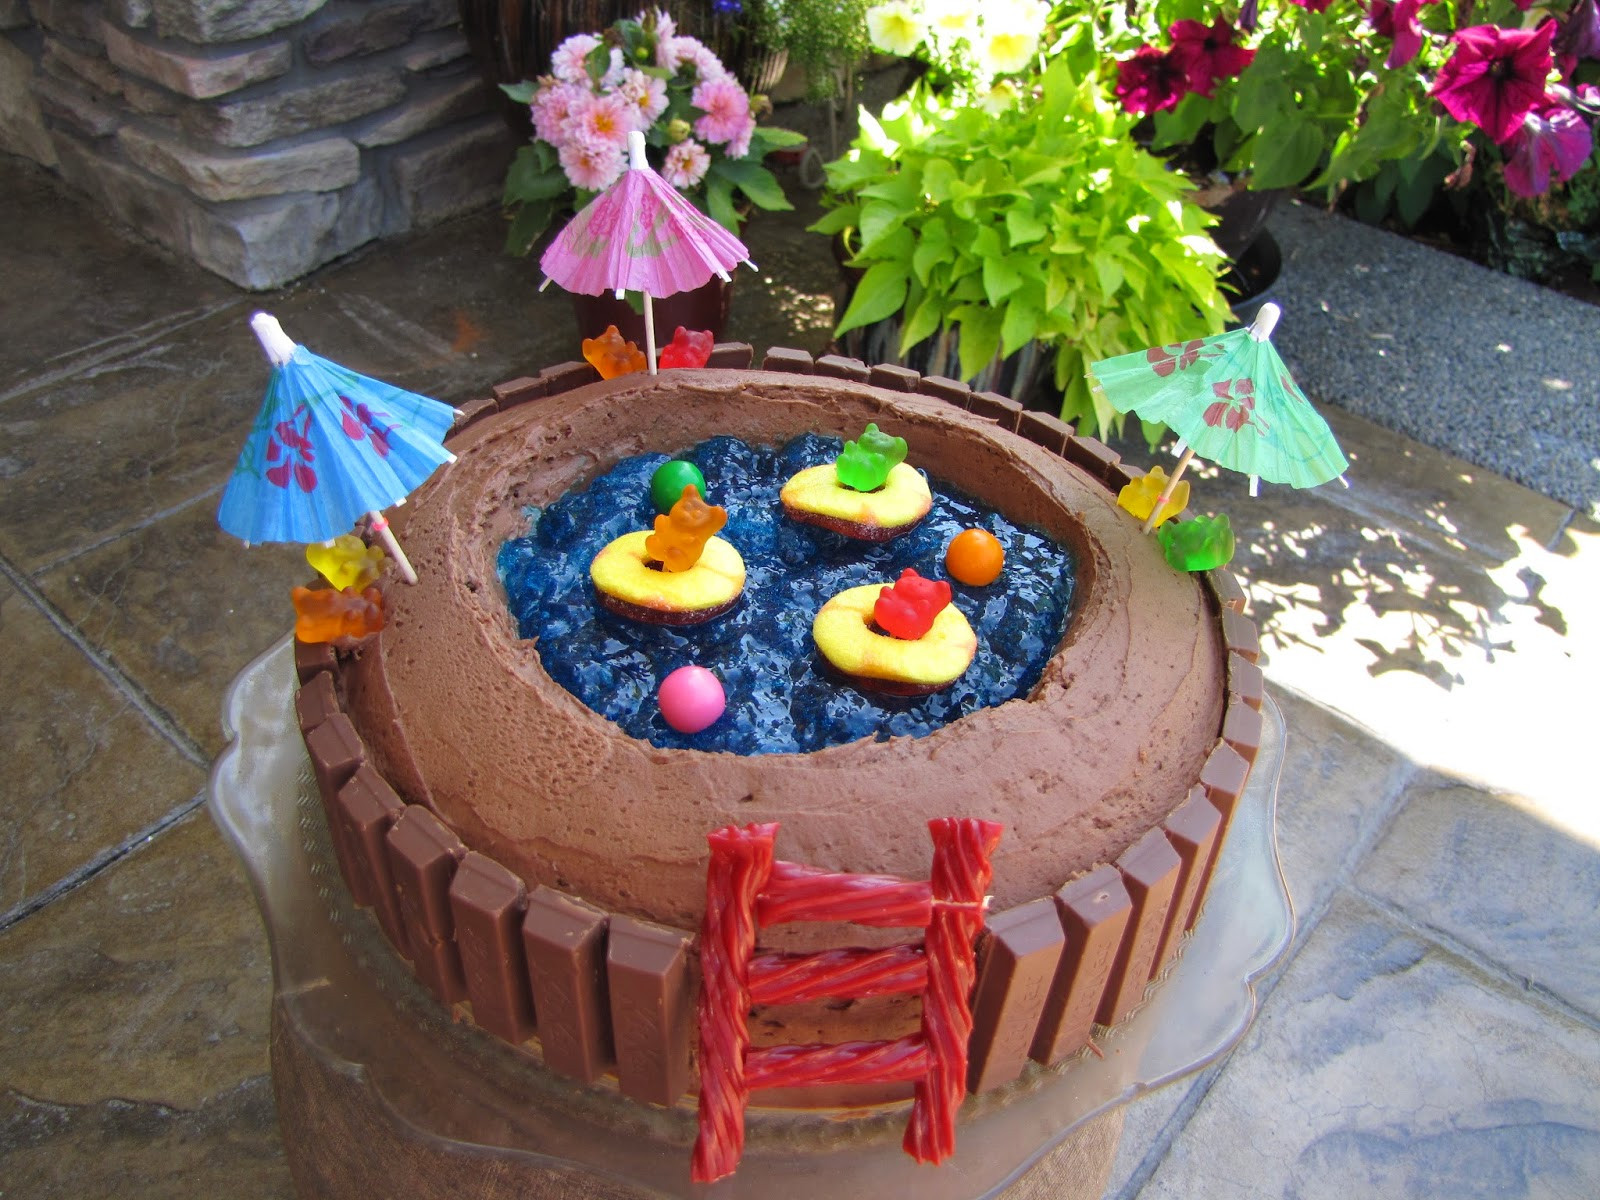 Pool Party Birthday Cakes
 Mennonite Girls Can Cook Swimming Pool Cake